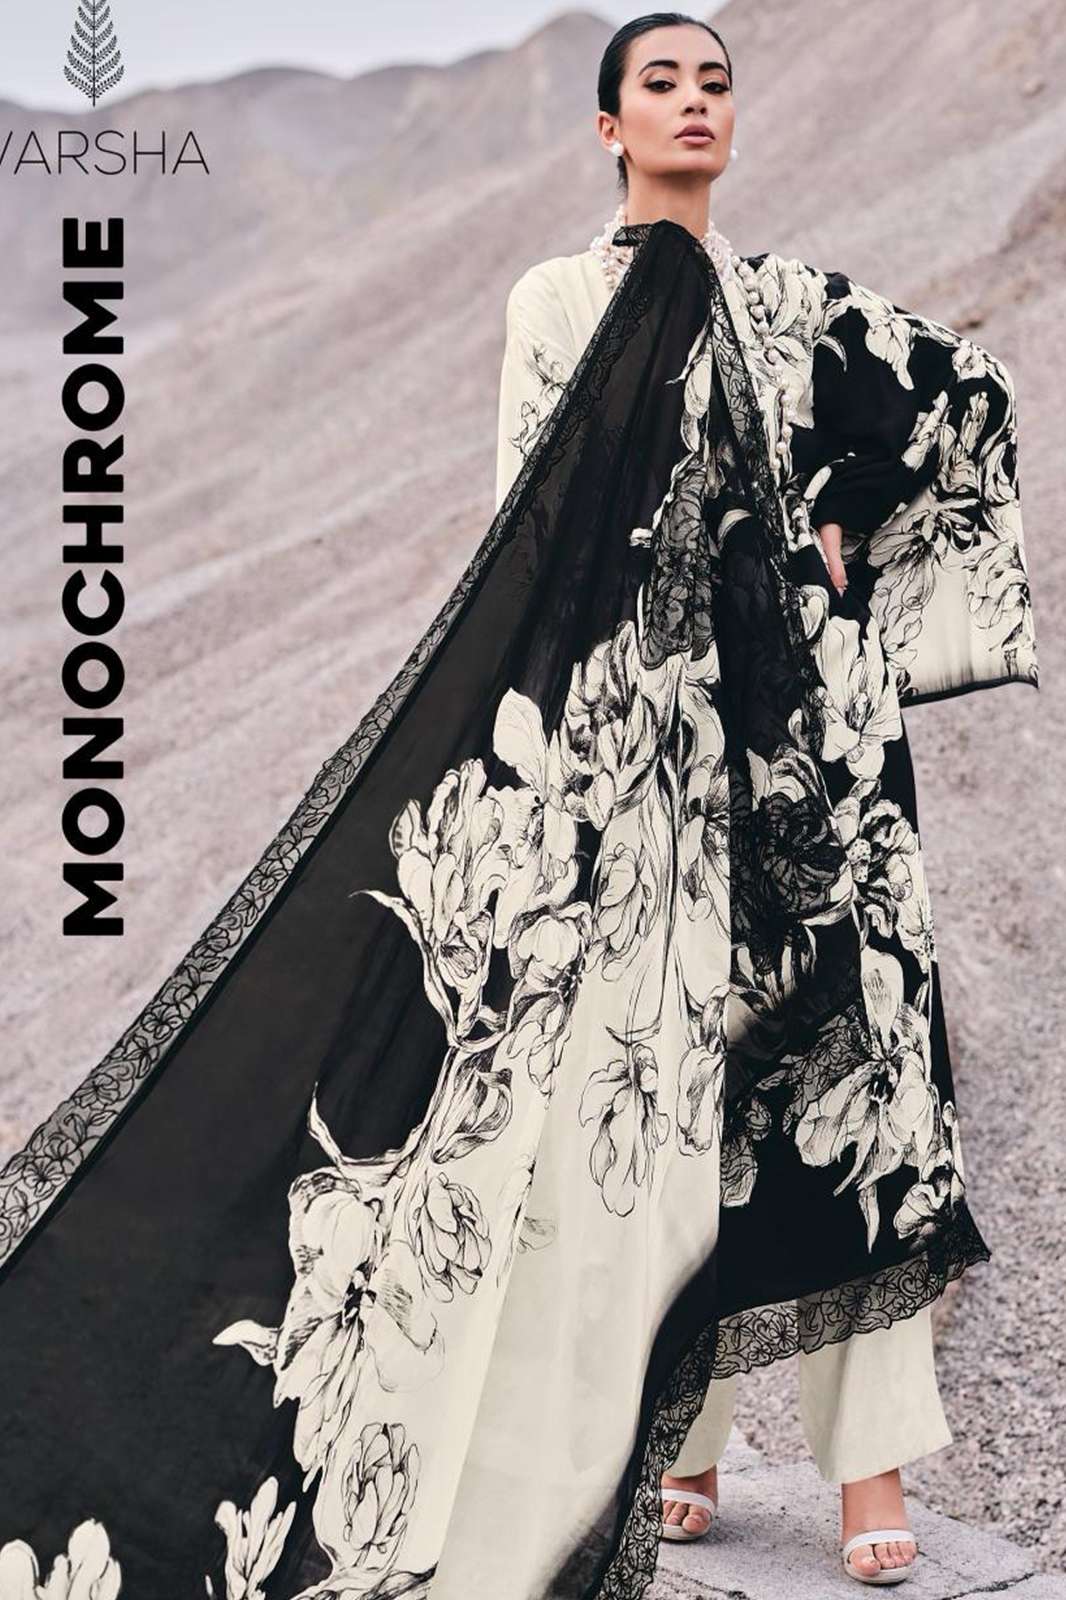  VARSHA MONOCHROME VISCOSE MUSLIN DIGITALLY PRINTED WITH HANDWORK AND EMBROIDERY LACES SUIT